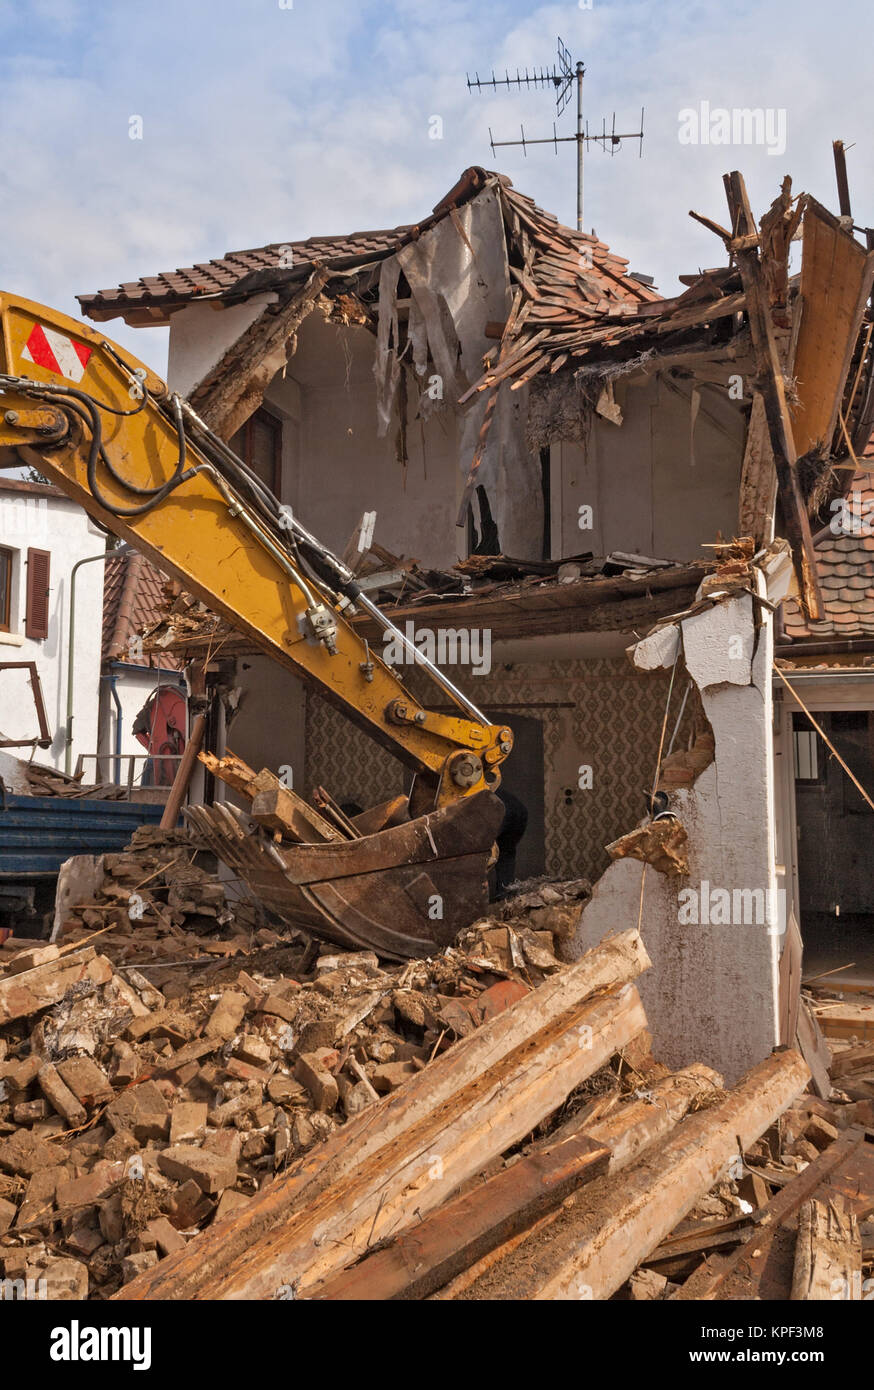 A large track hoe excavator tearing down an old house Stock Photo